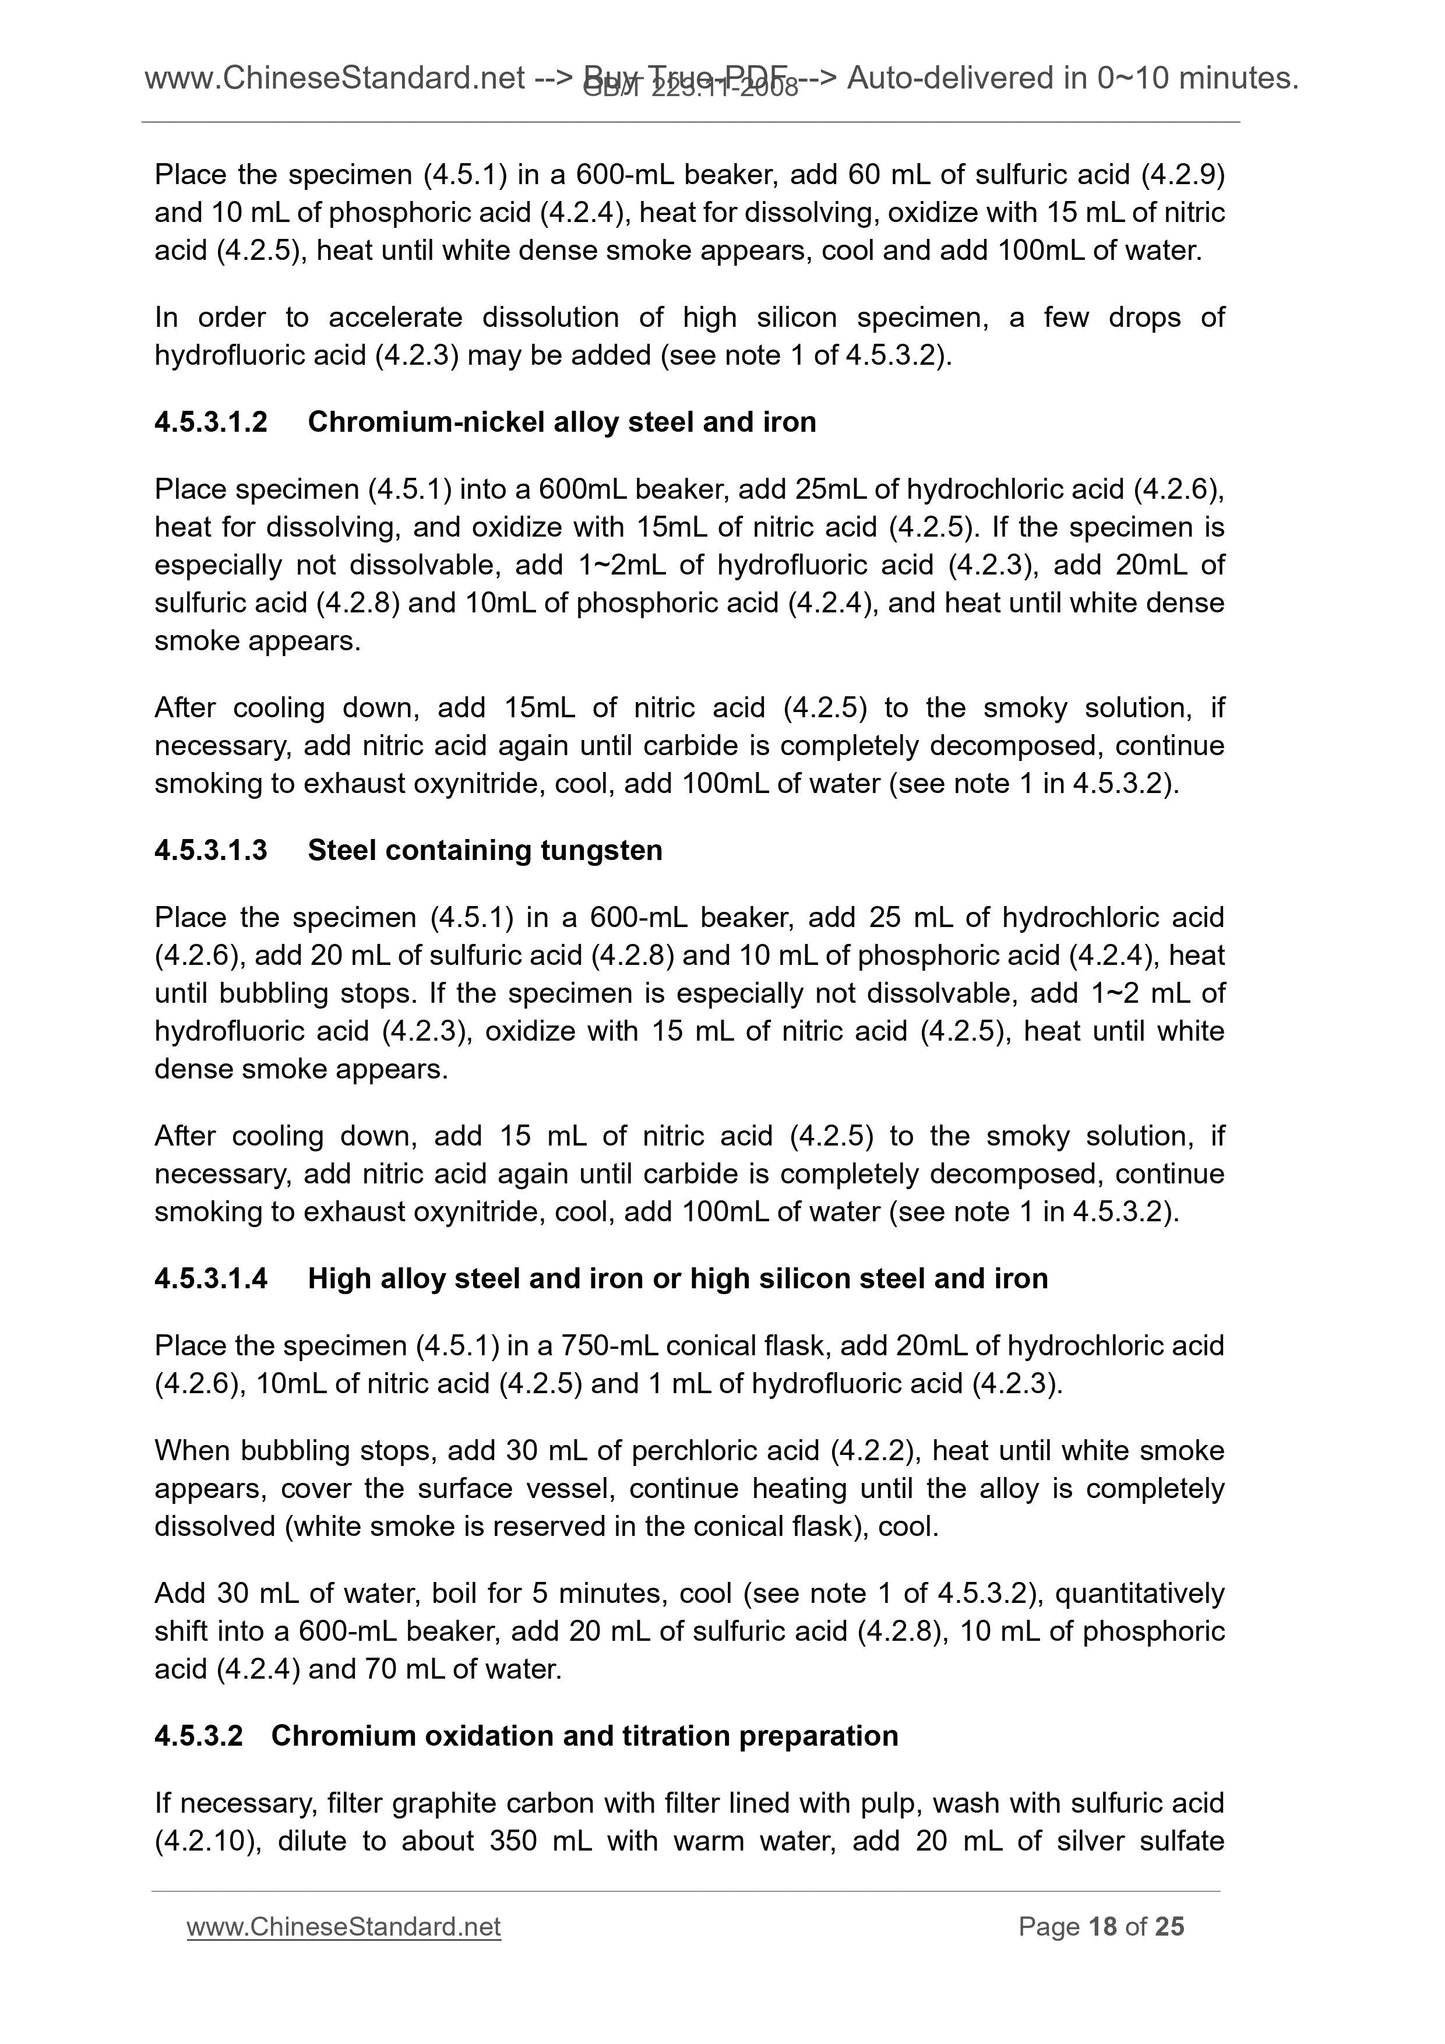 GB/T 223.11-2008 Page 10